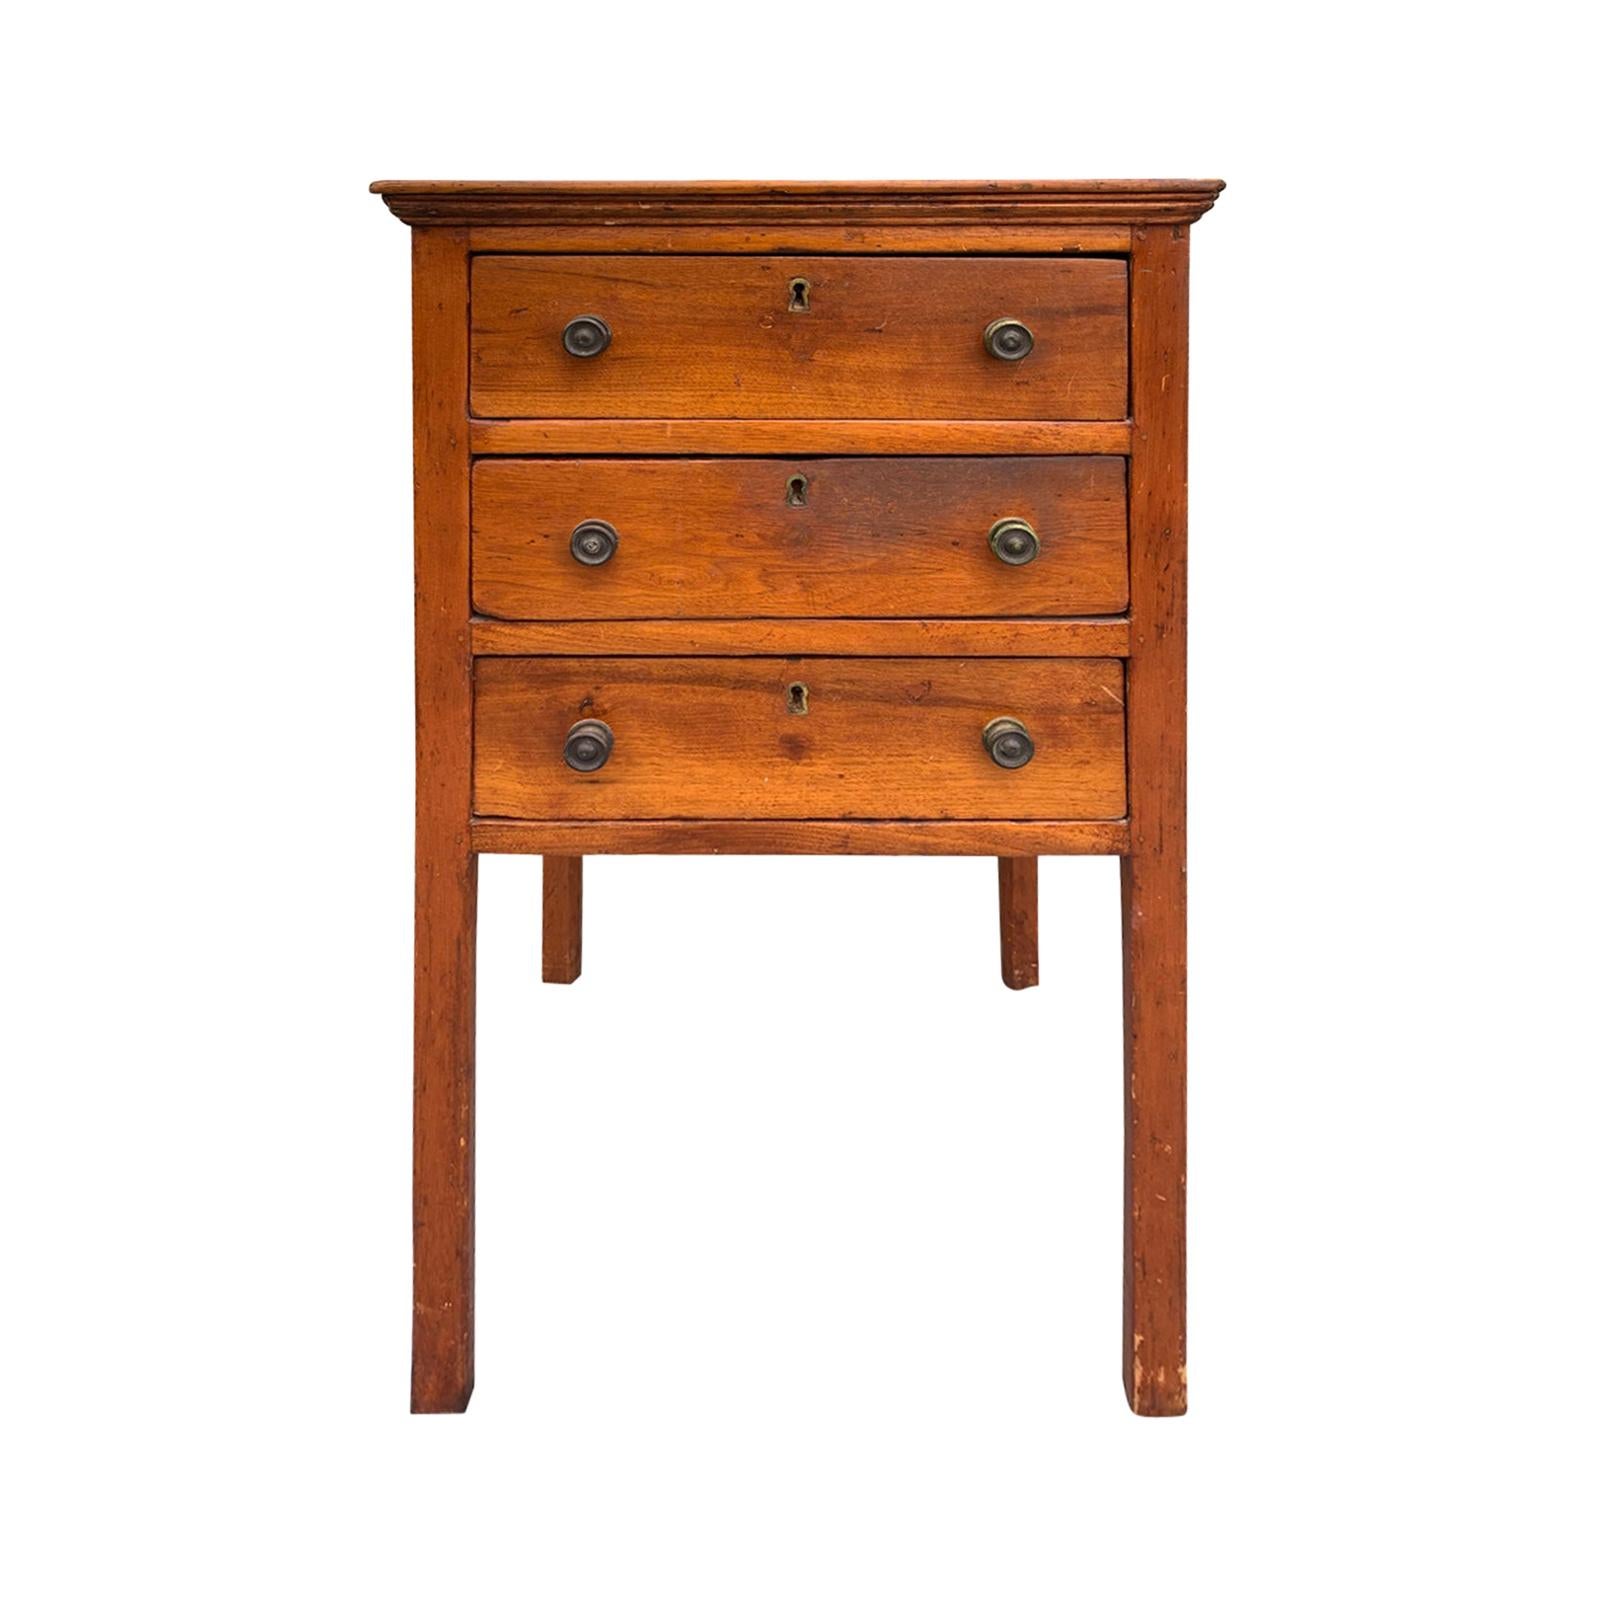 George III Mahogany & Pine Three-Drawer Side Chest with Later Pulls, circa 1800s